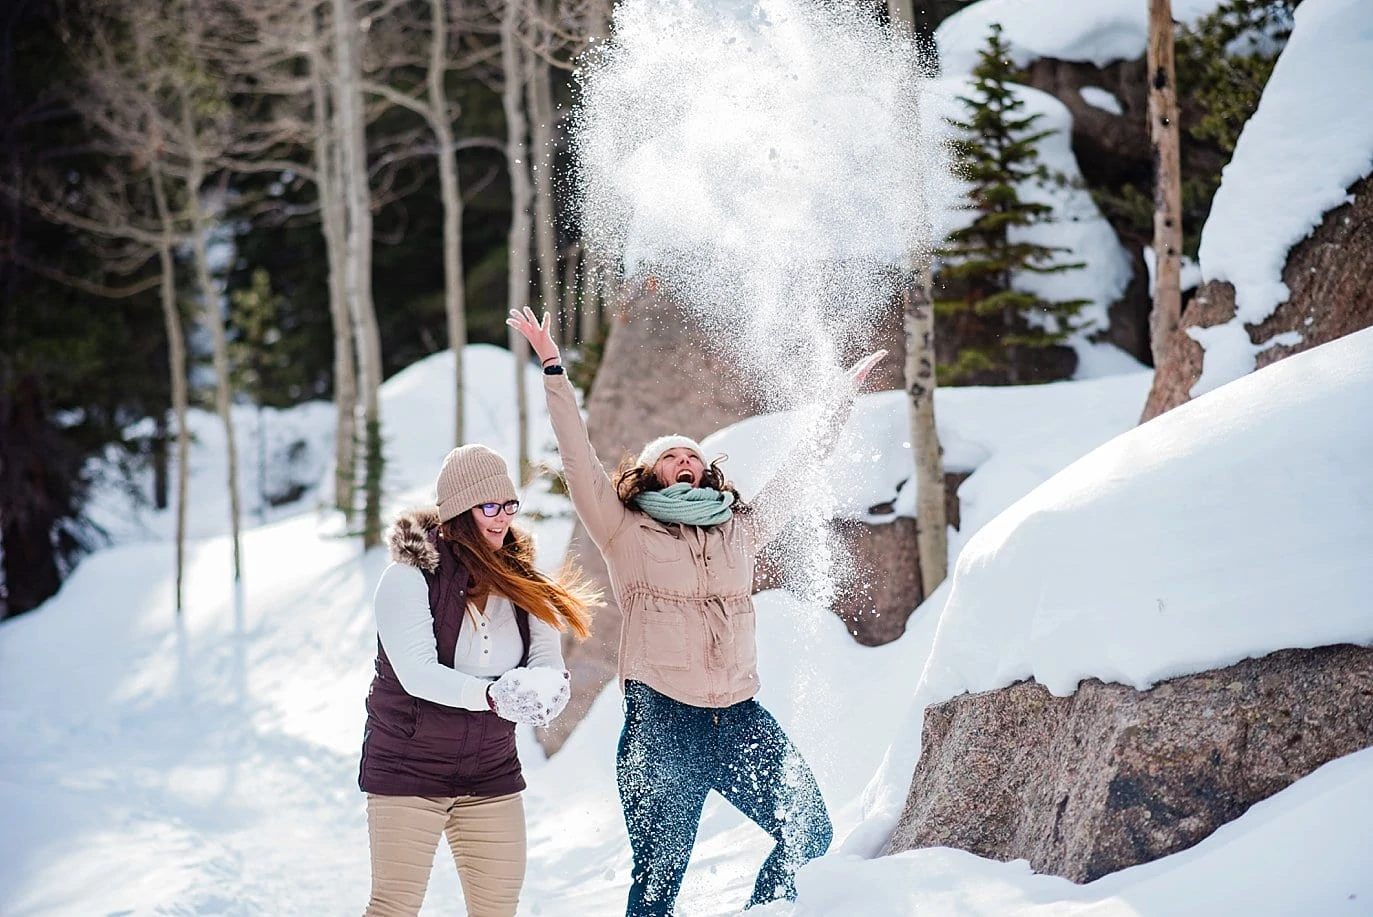 same-sex couple plays in snow Alberta Falls Rocky Mountain National Park winter hiking engagement by Rocky Mountain engagement photographer Jennie Crate, Photographer